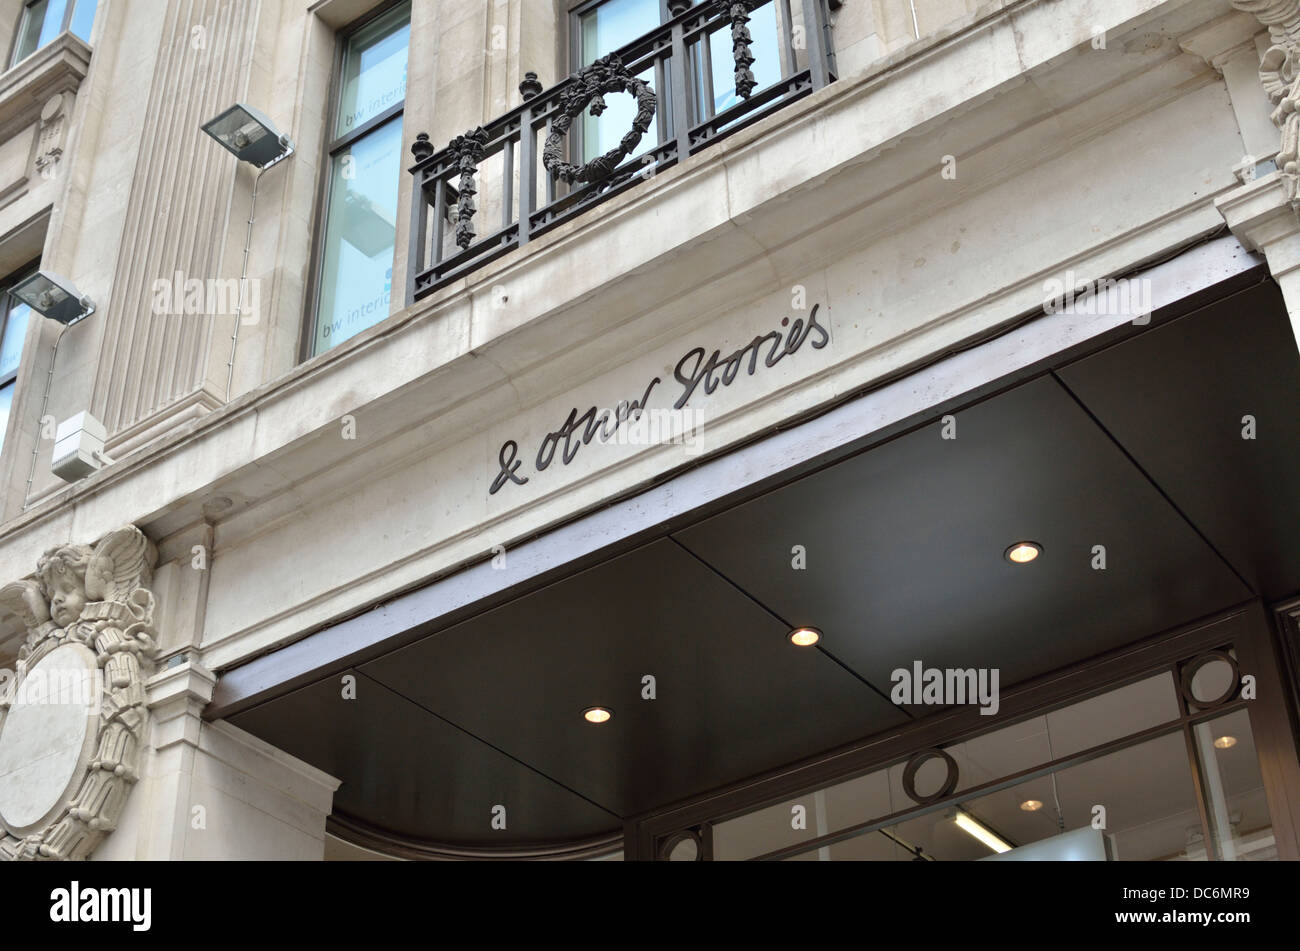 & Other Stories fashion store in Regent Street, London, UK. Stock Photo